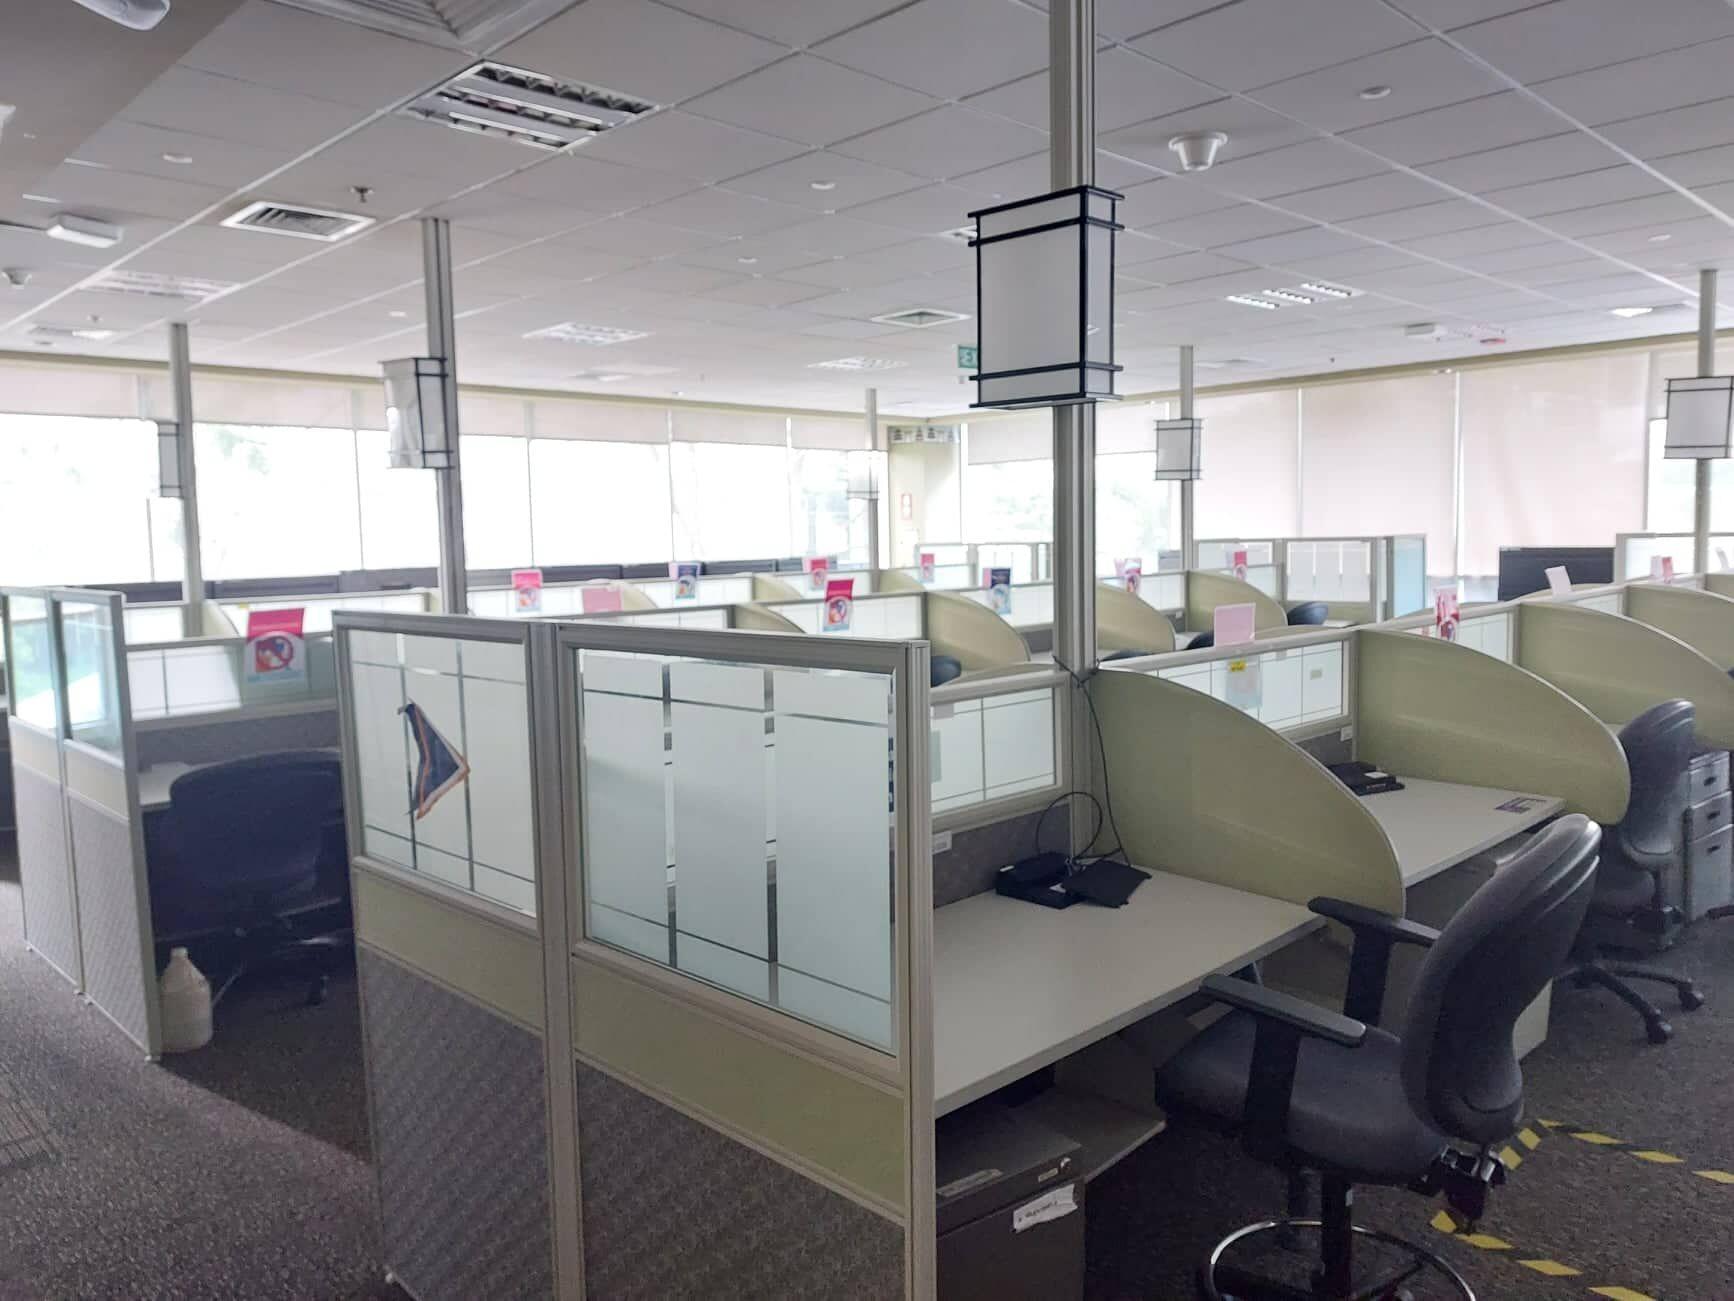 1500 sqm Office Space Lease Rent Alabang Muntinlupa Philippines